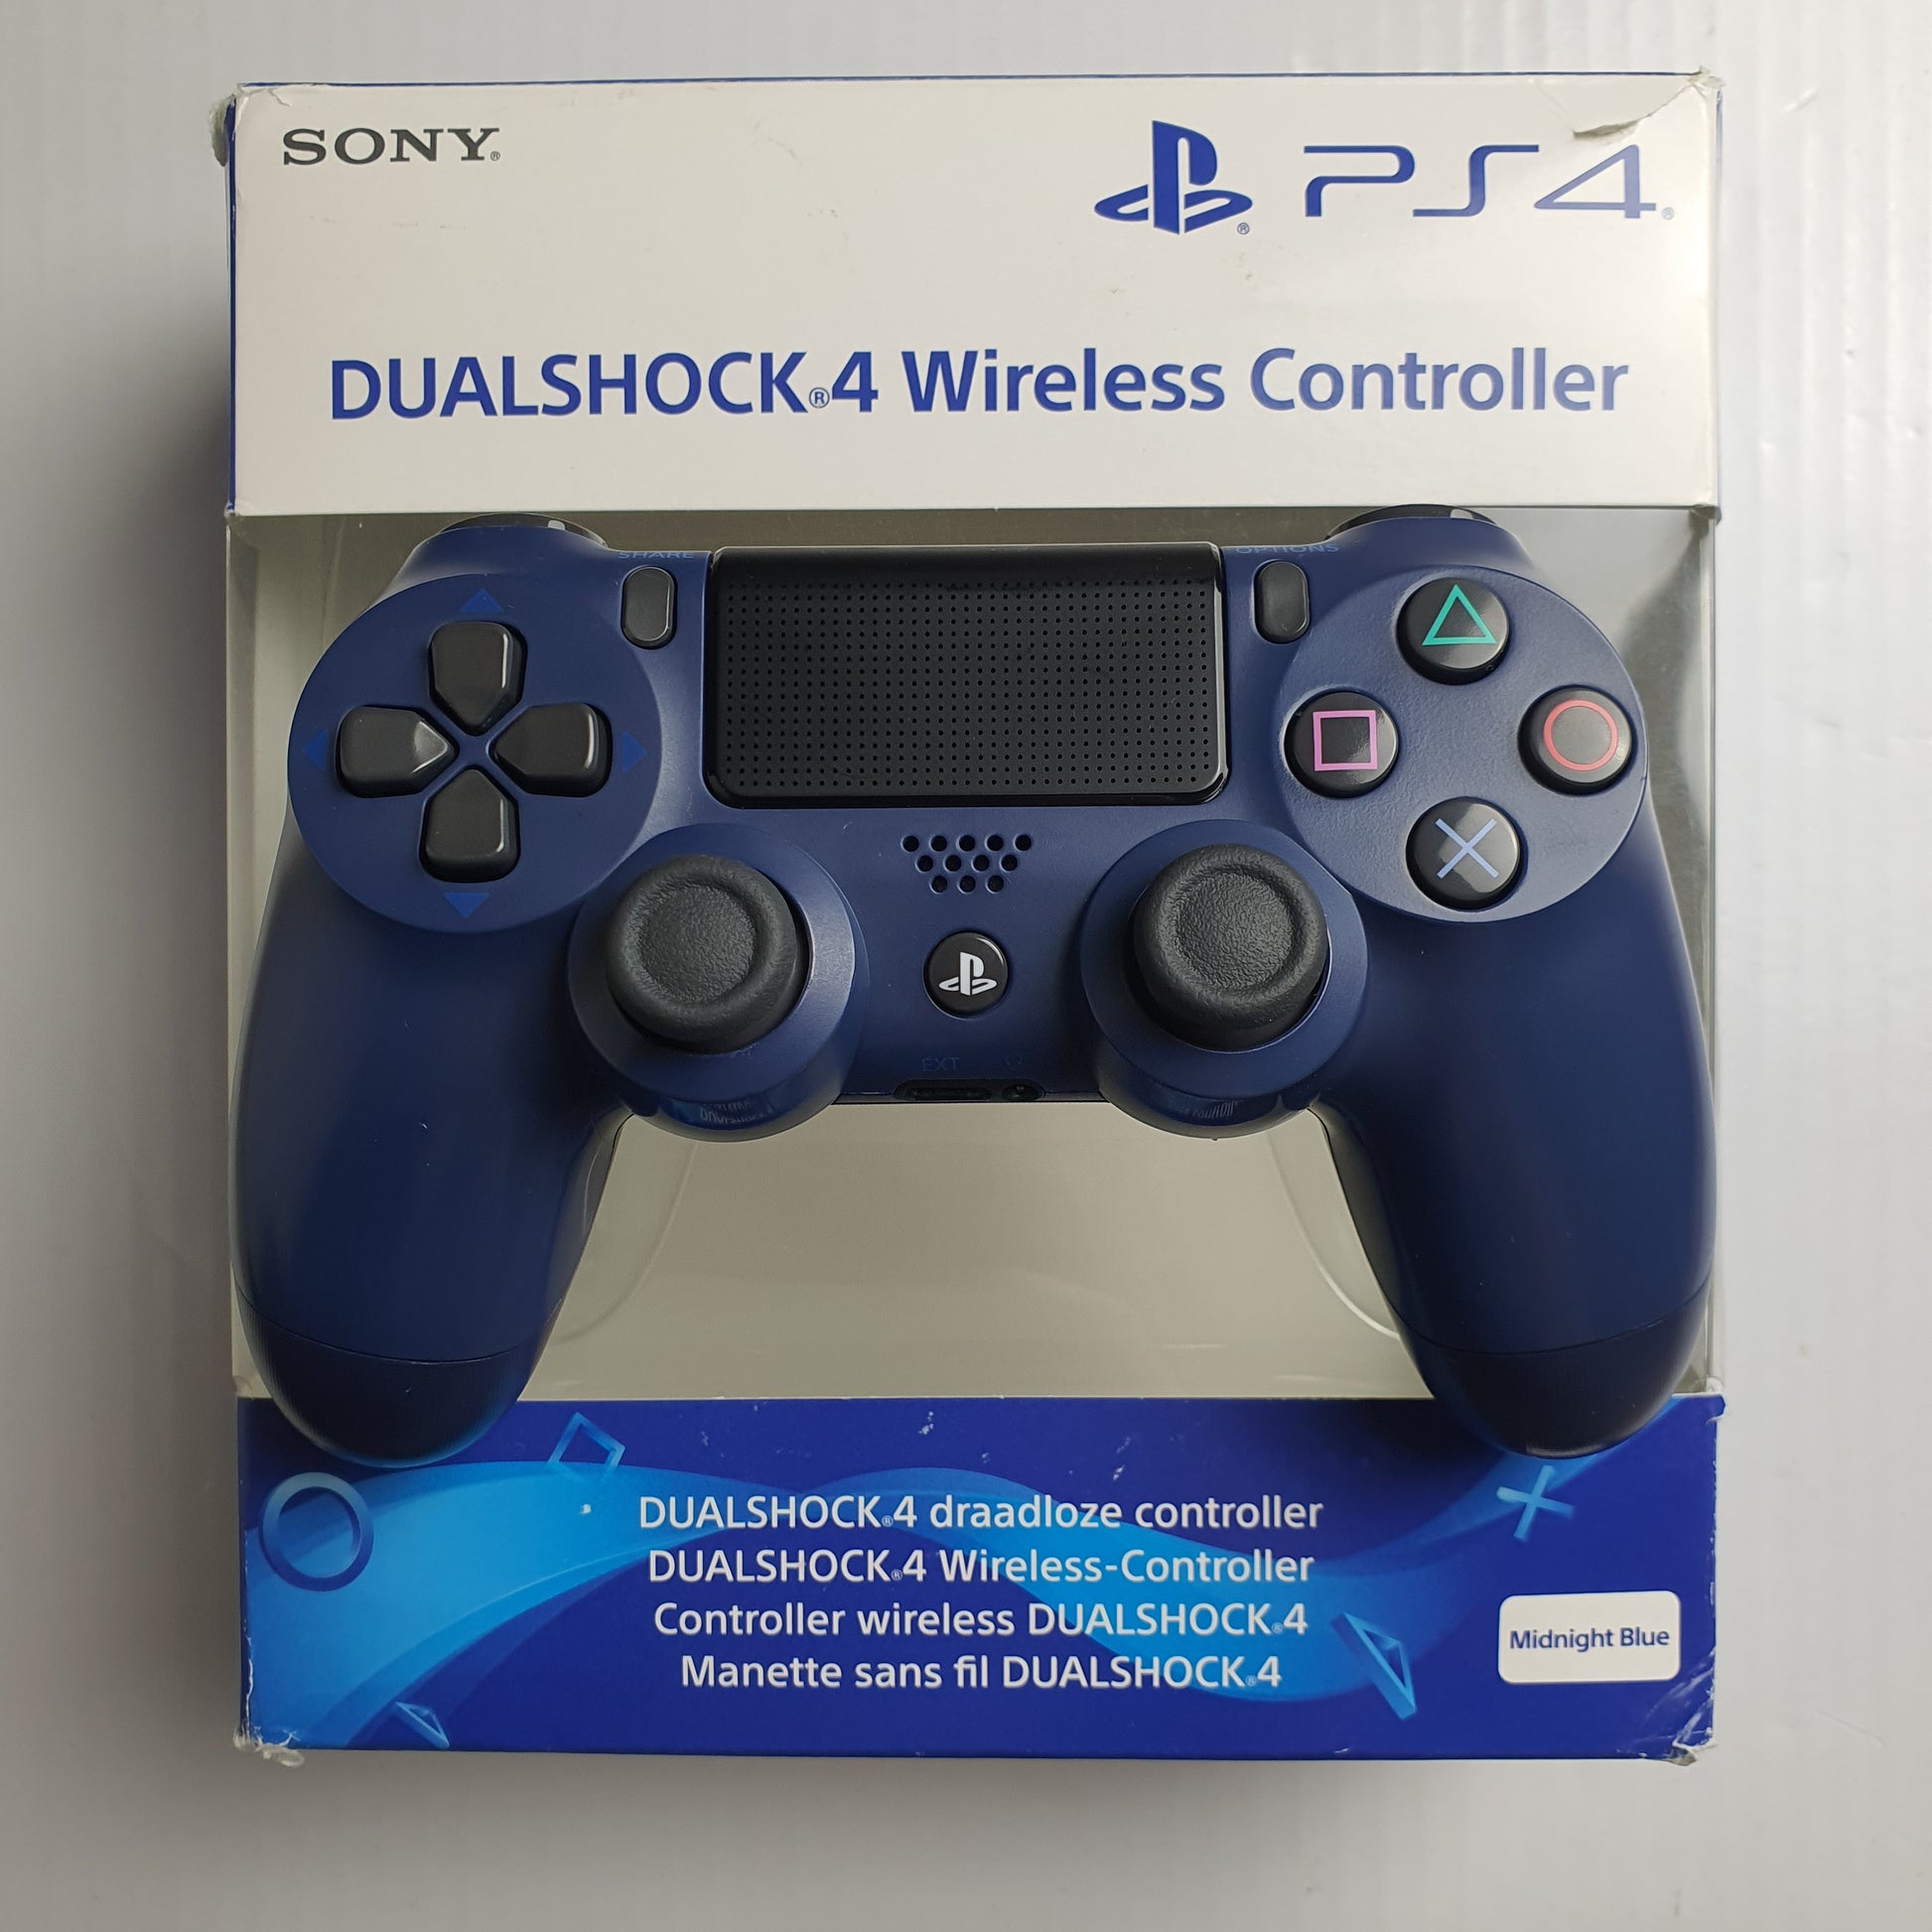 Offical Sony PlayStation PS4 Tech Boxe 4 DualShock Blue\' – Wireless \'Midnight Dogghead